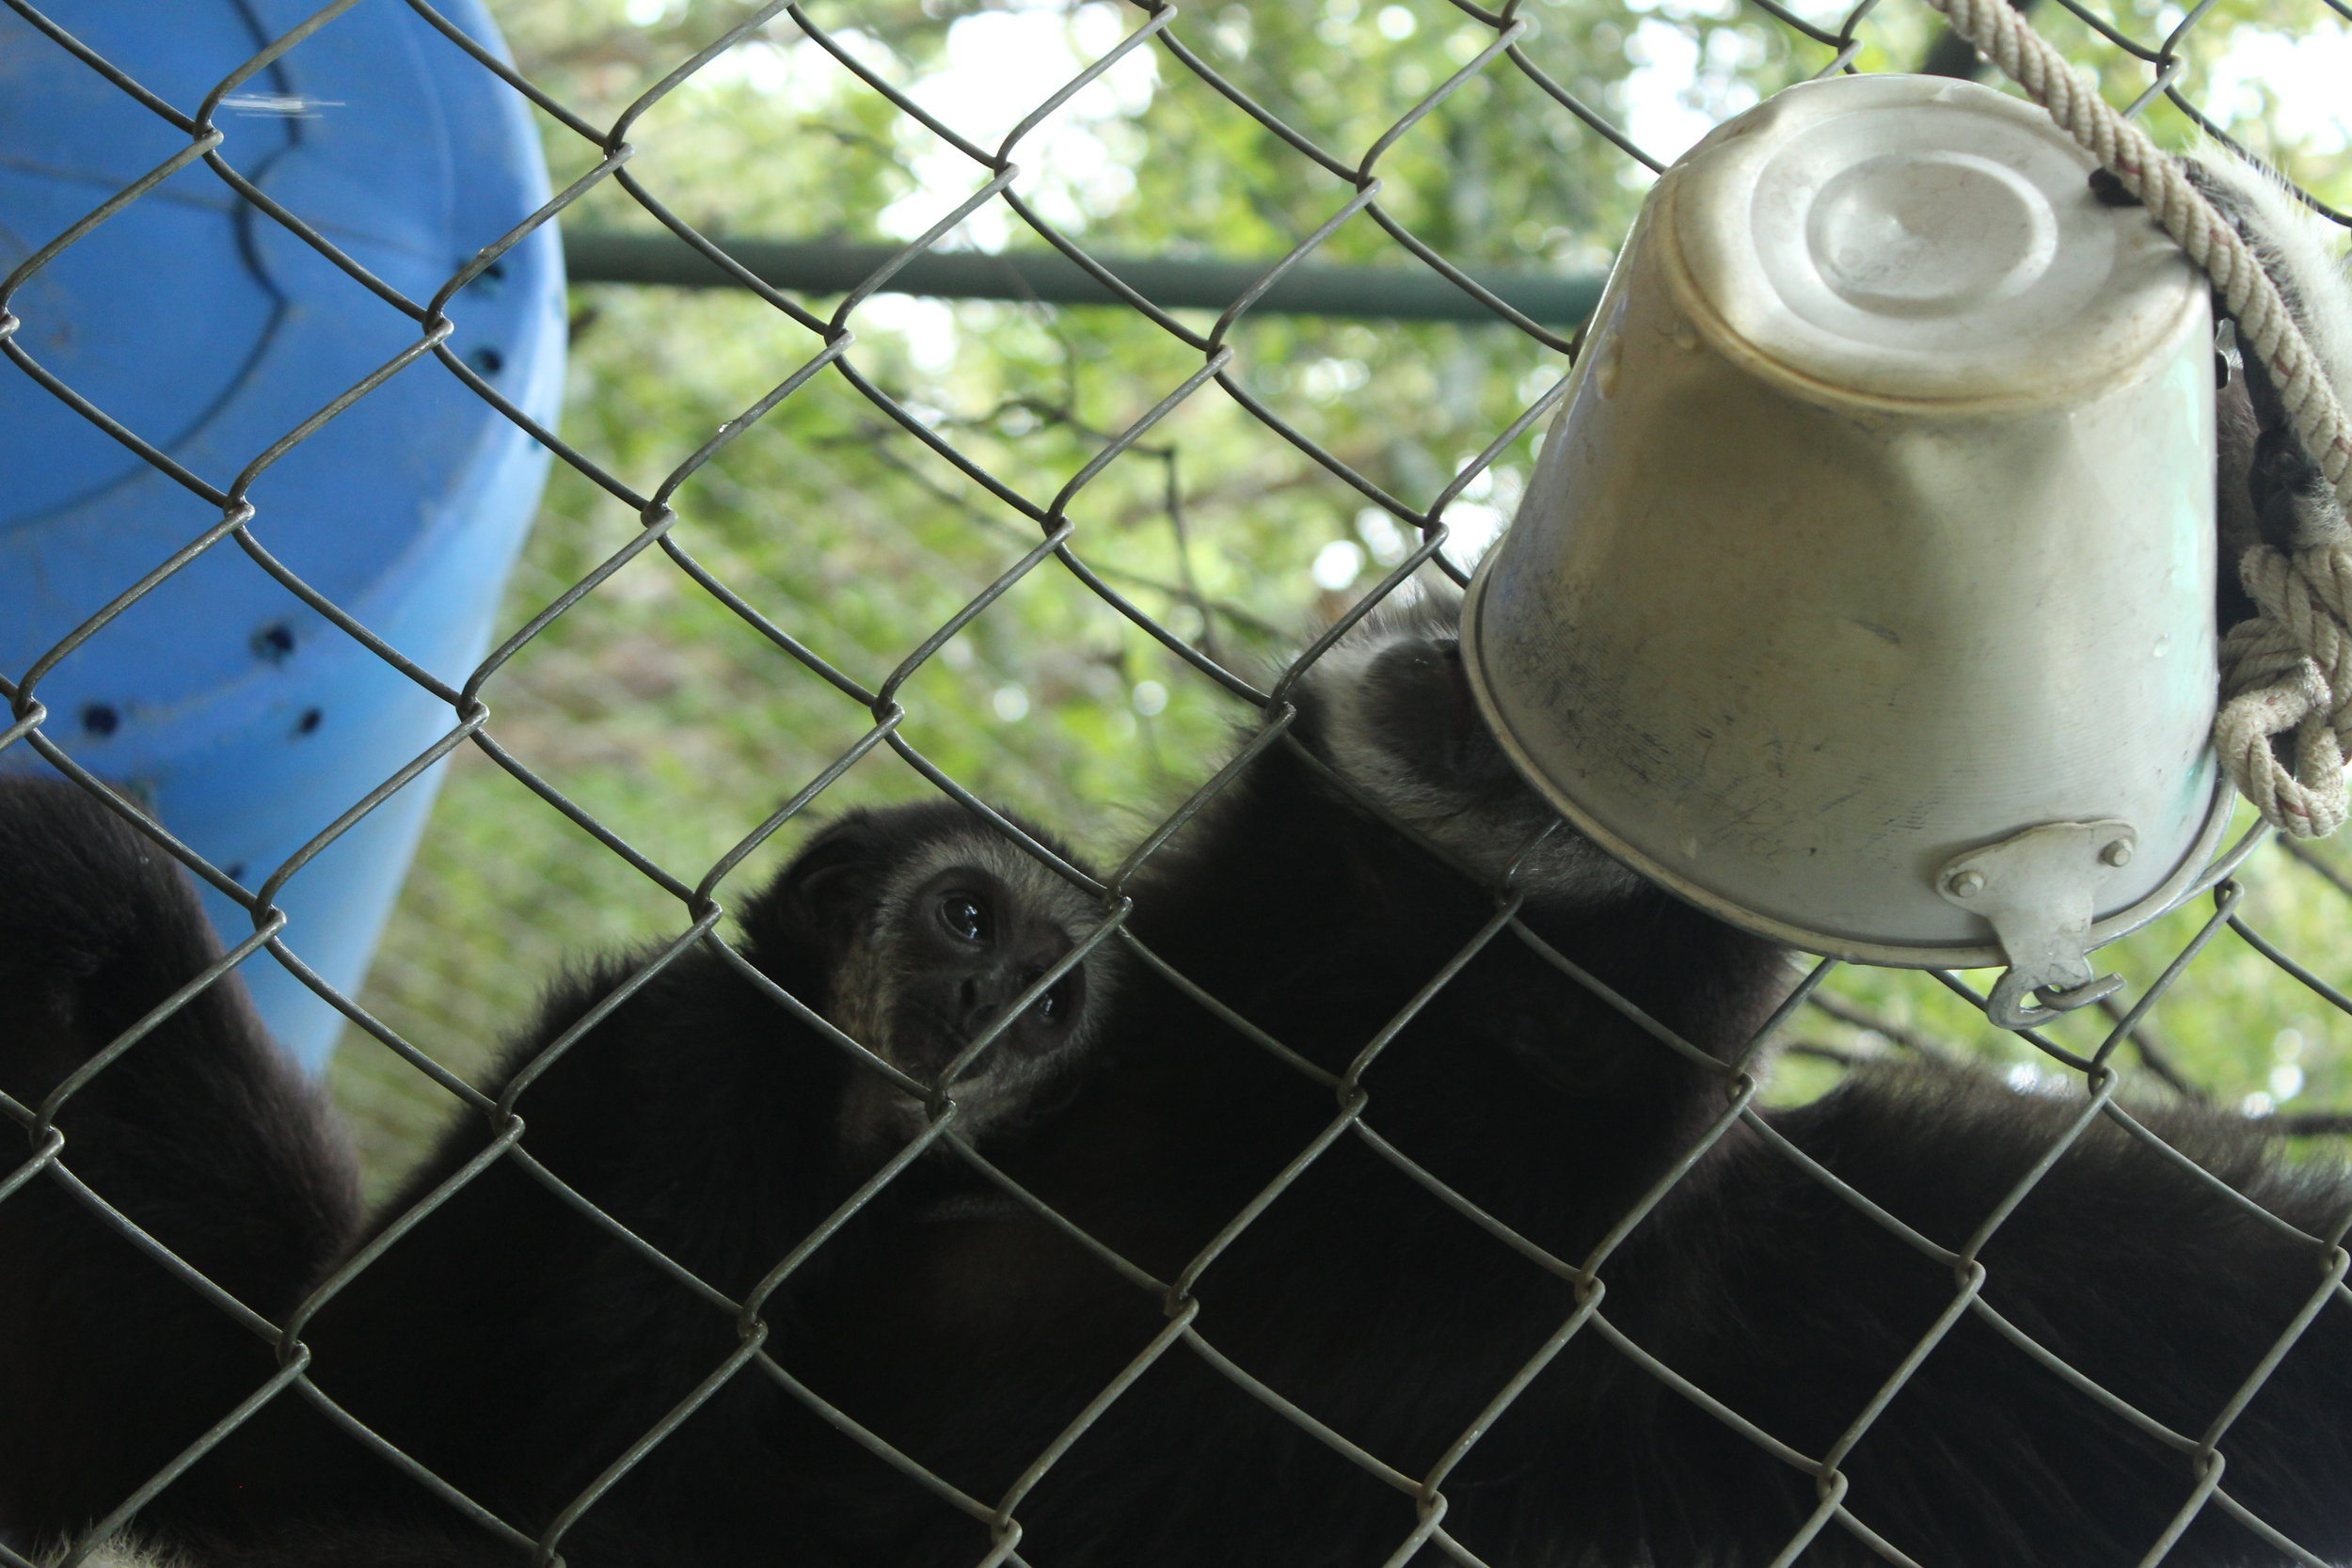  A  baby gibbon observes her mother drinking from their water pail. One of  our daily tasks was refilling water regularly, a challenge indeed with  some gibbons who loved to dump out the buckets for fun. 